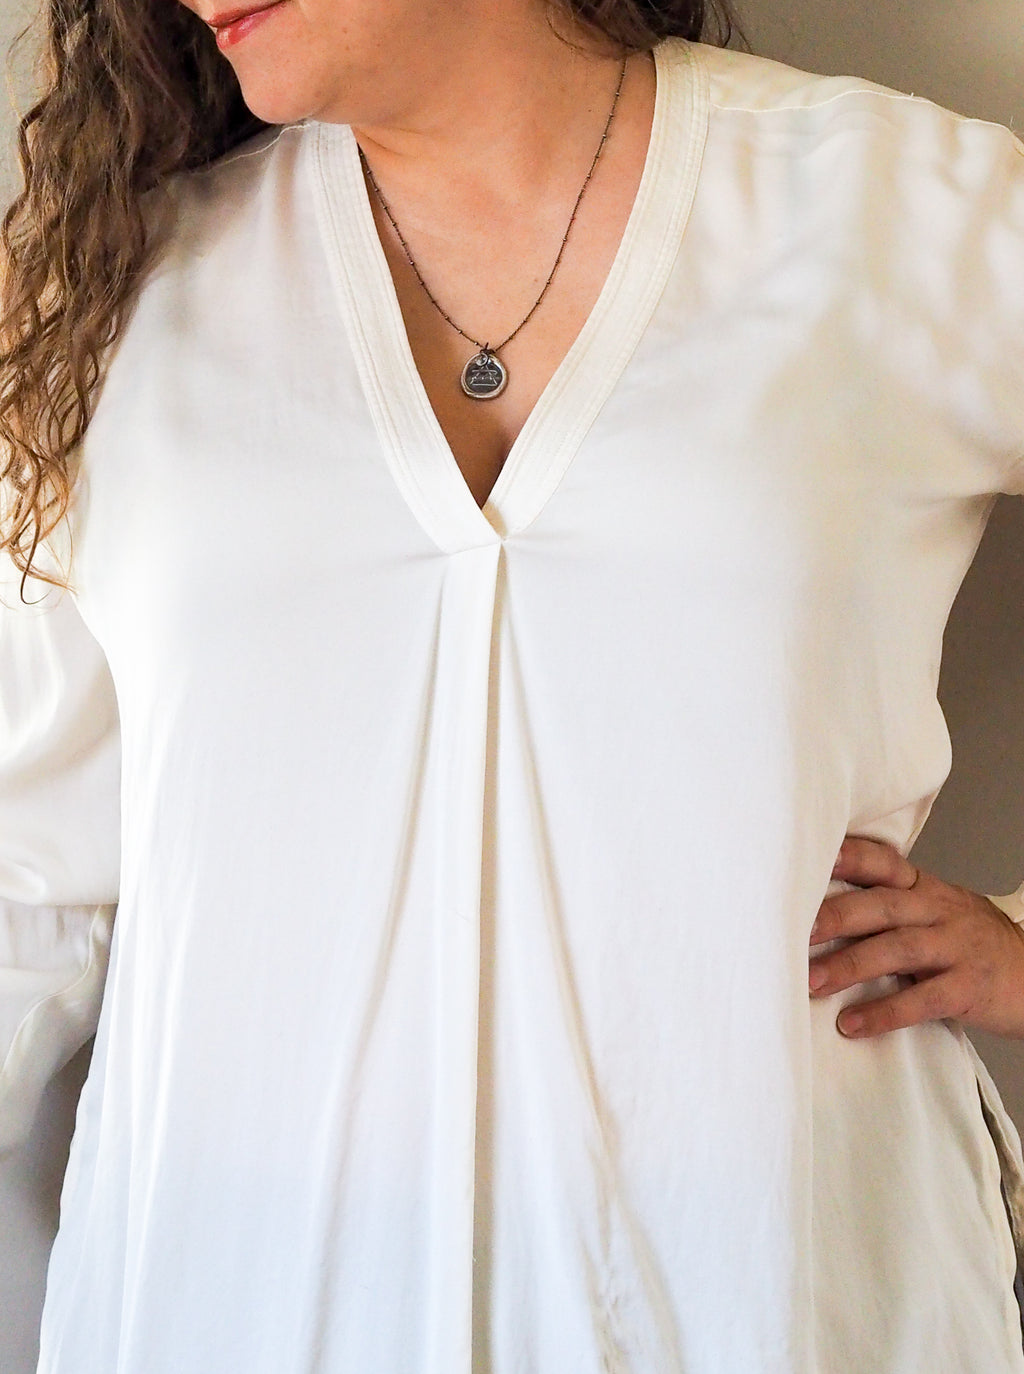 air sign silver necklace woman in white top